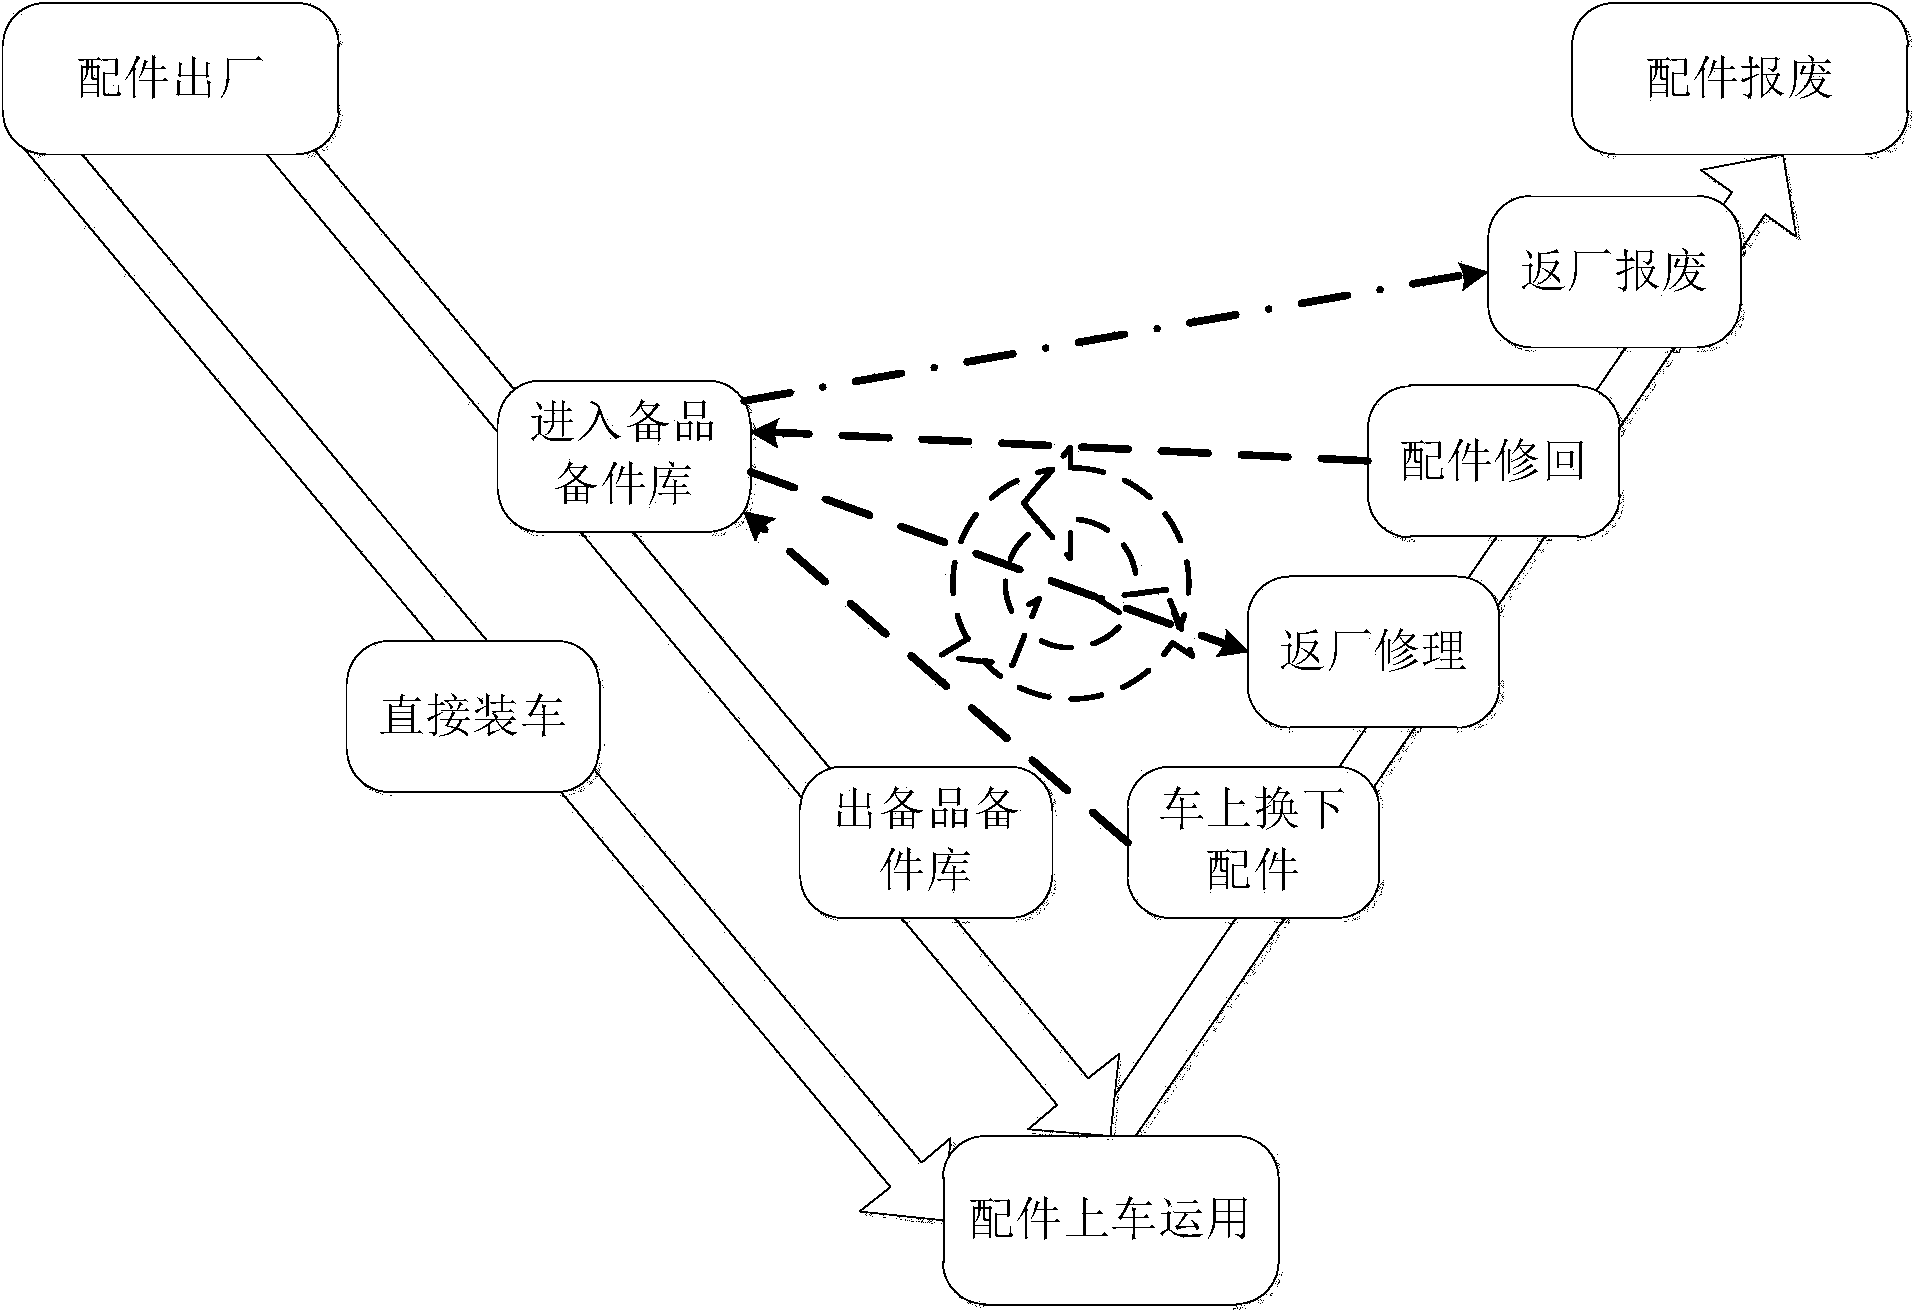 Method and system of product life-cycle management of module-level parts of ATP (Automatic Train Protection System) vehicle equipment